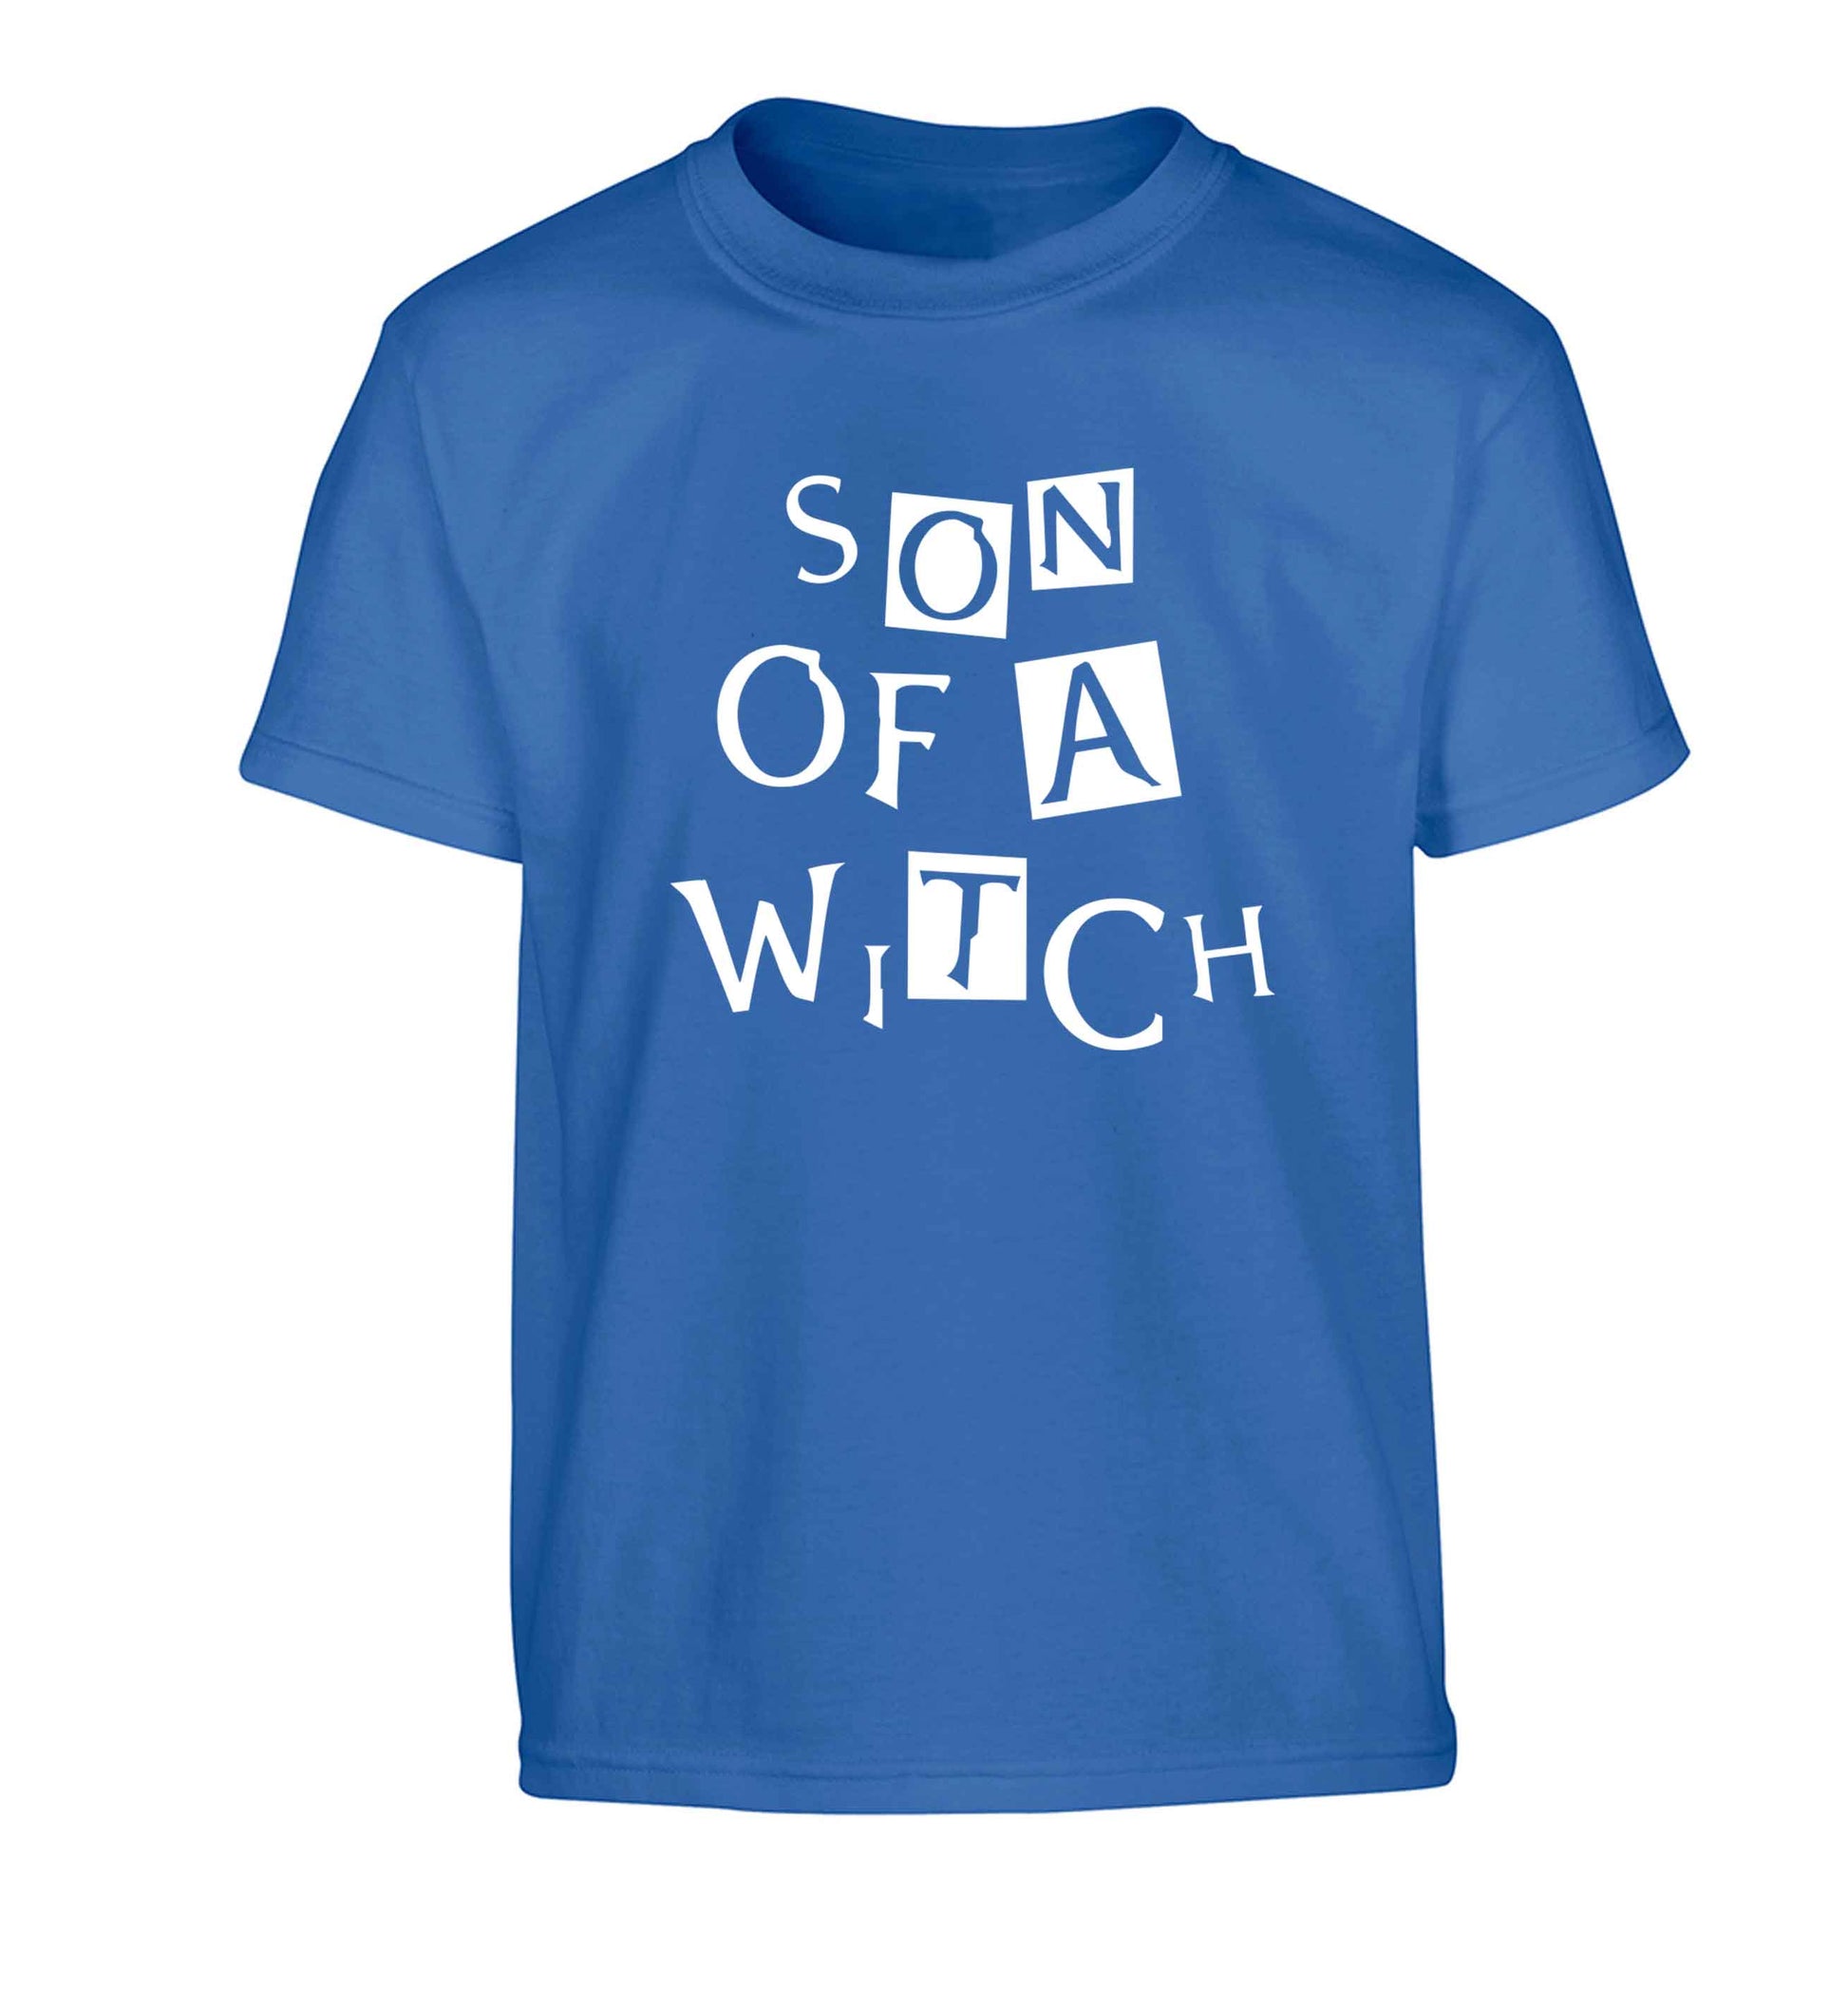 Son of a witch Children's blue Tshirt 12-13 Years